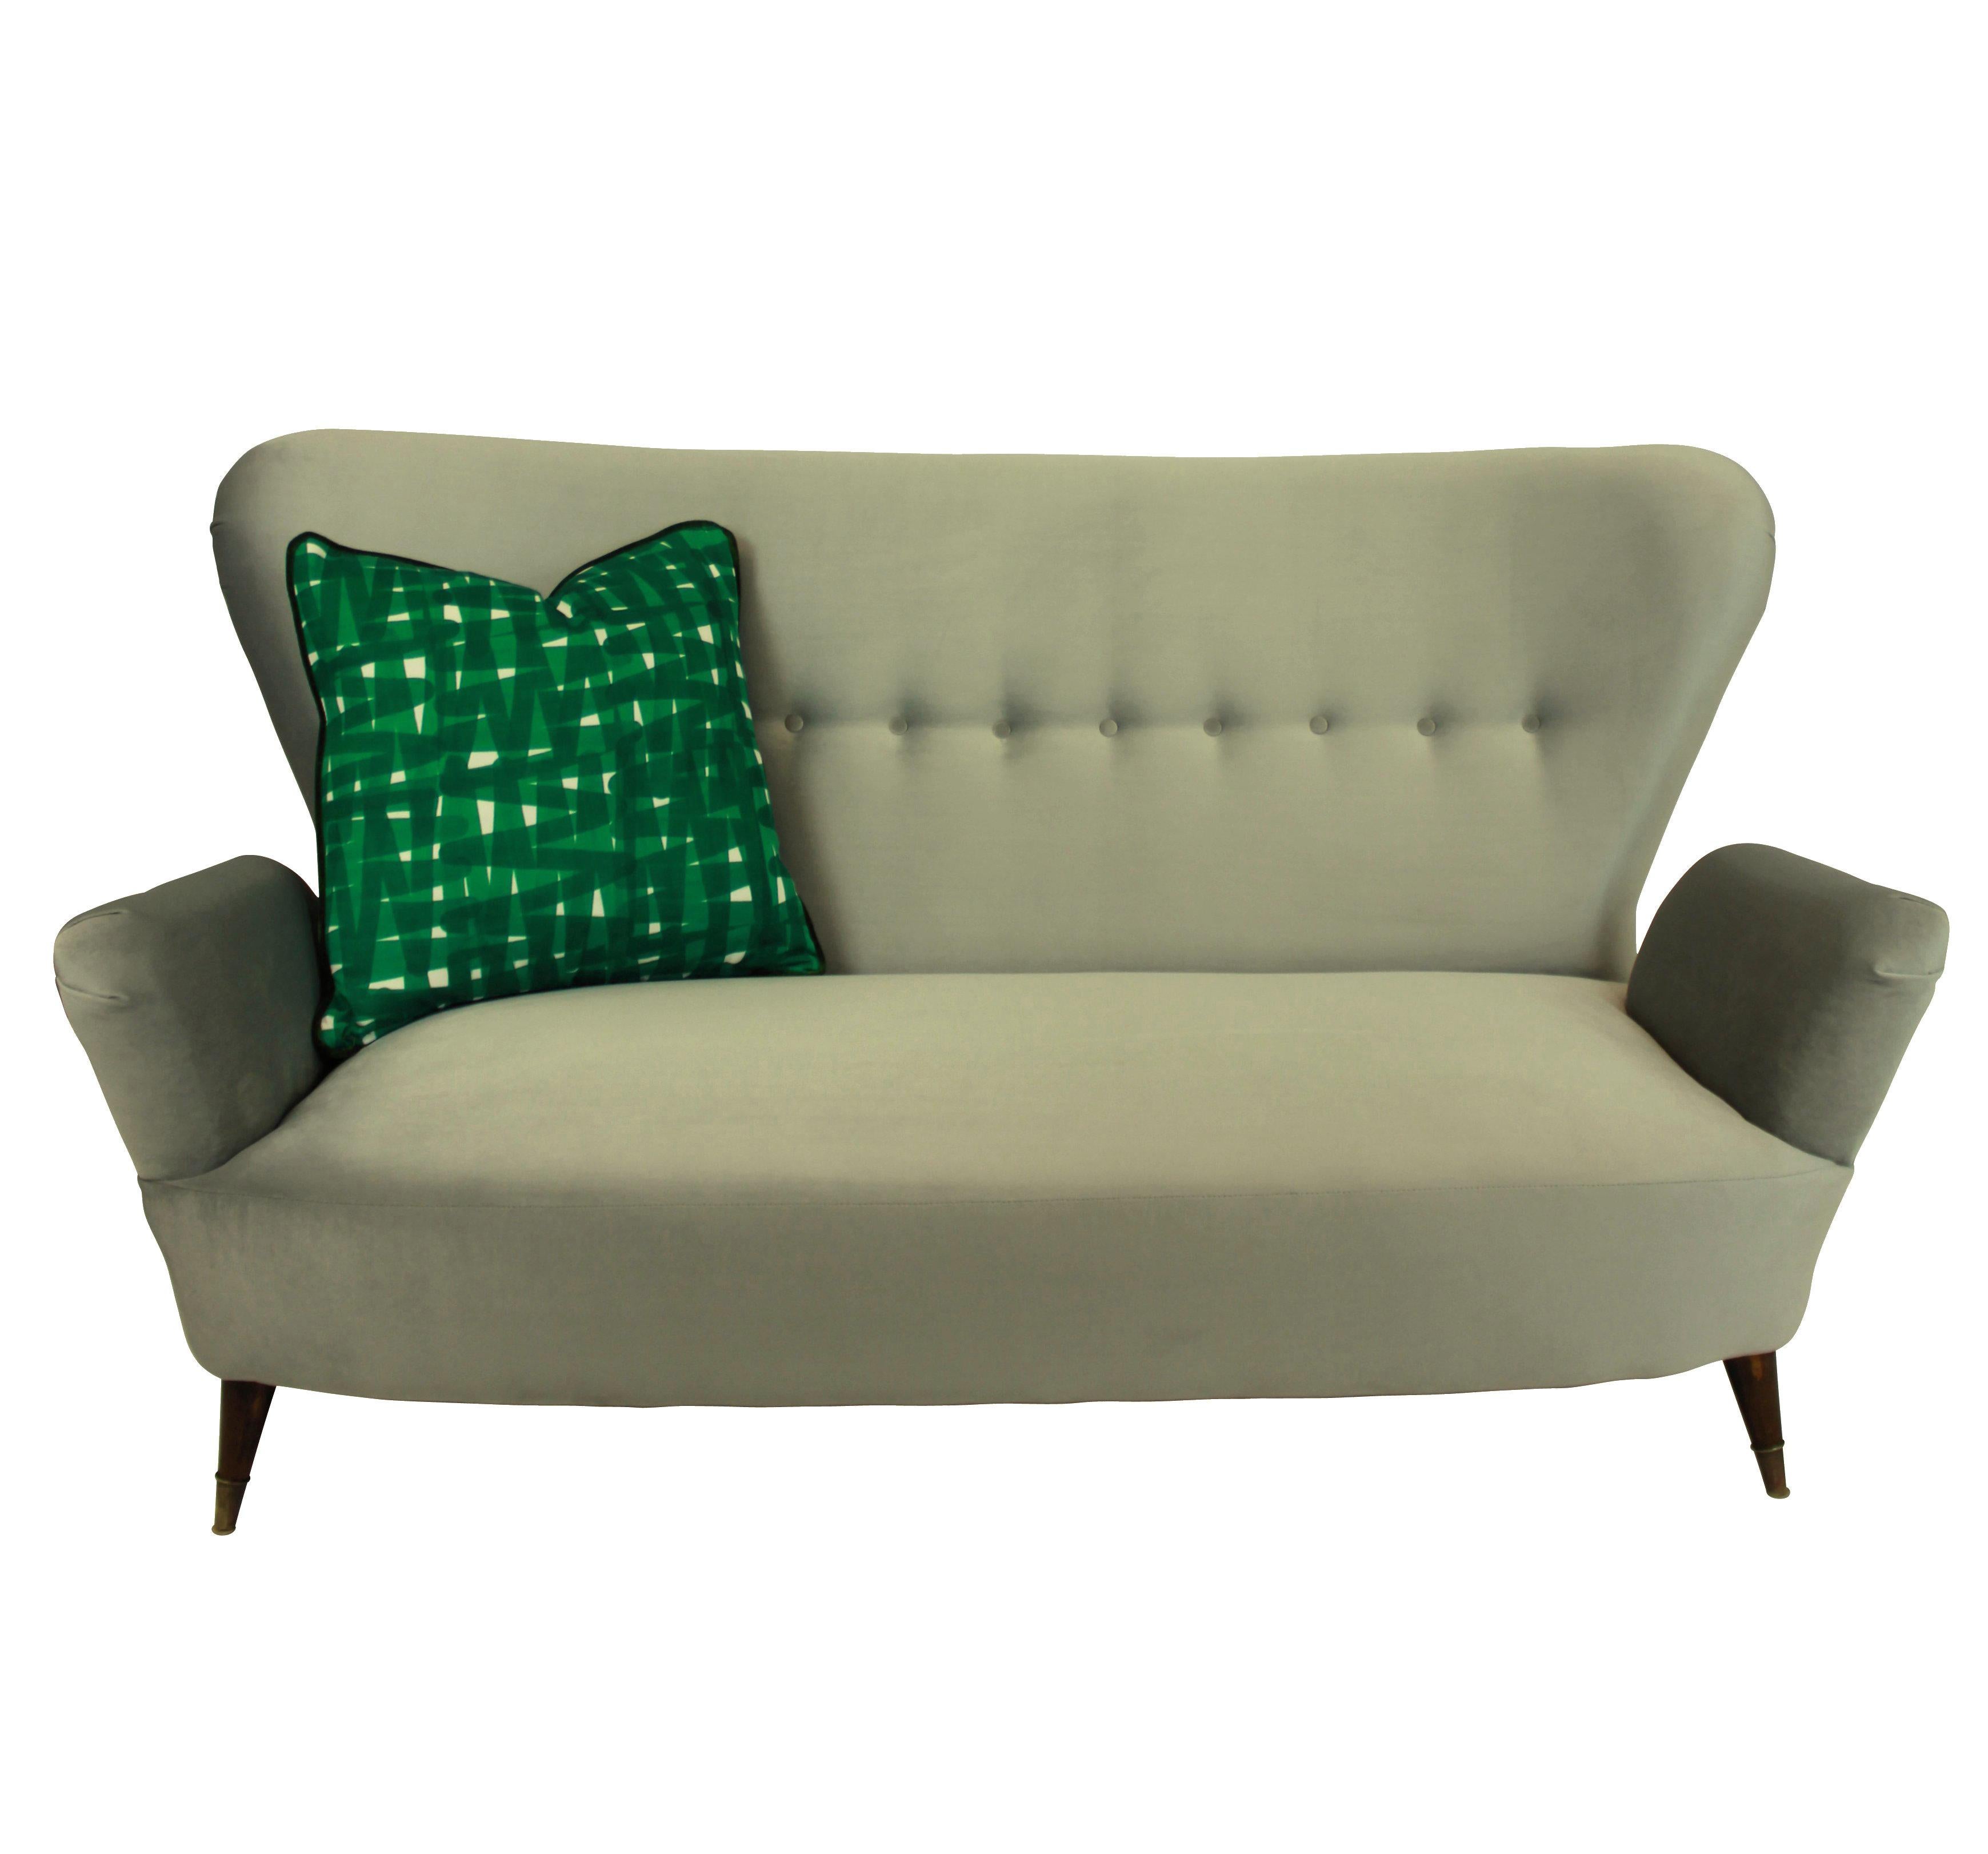 A stylish Italian sofa of good shape with tapering legs and brass sabot by Emilia Sala and Giorgio Madini (designer), Fratelli Galimberti Cantù (manufacturer). Newly upholstered in silver grey velvet, with seat cushions removed for better